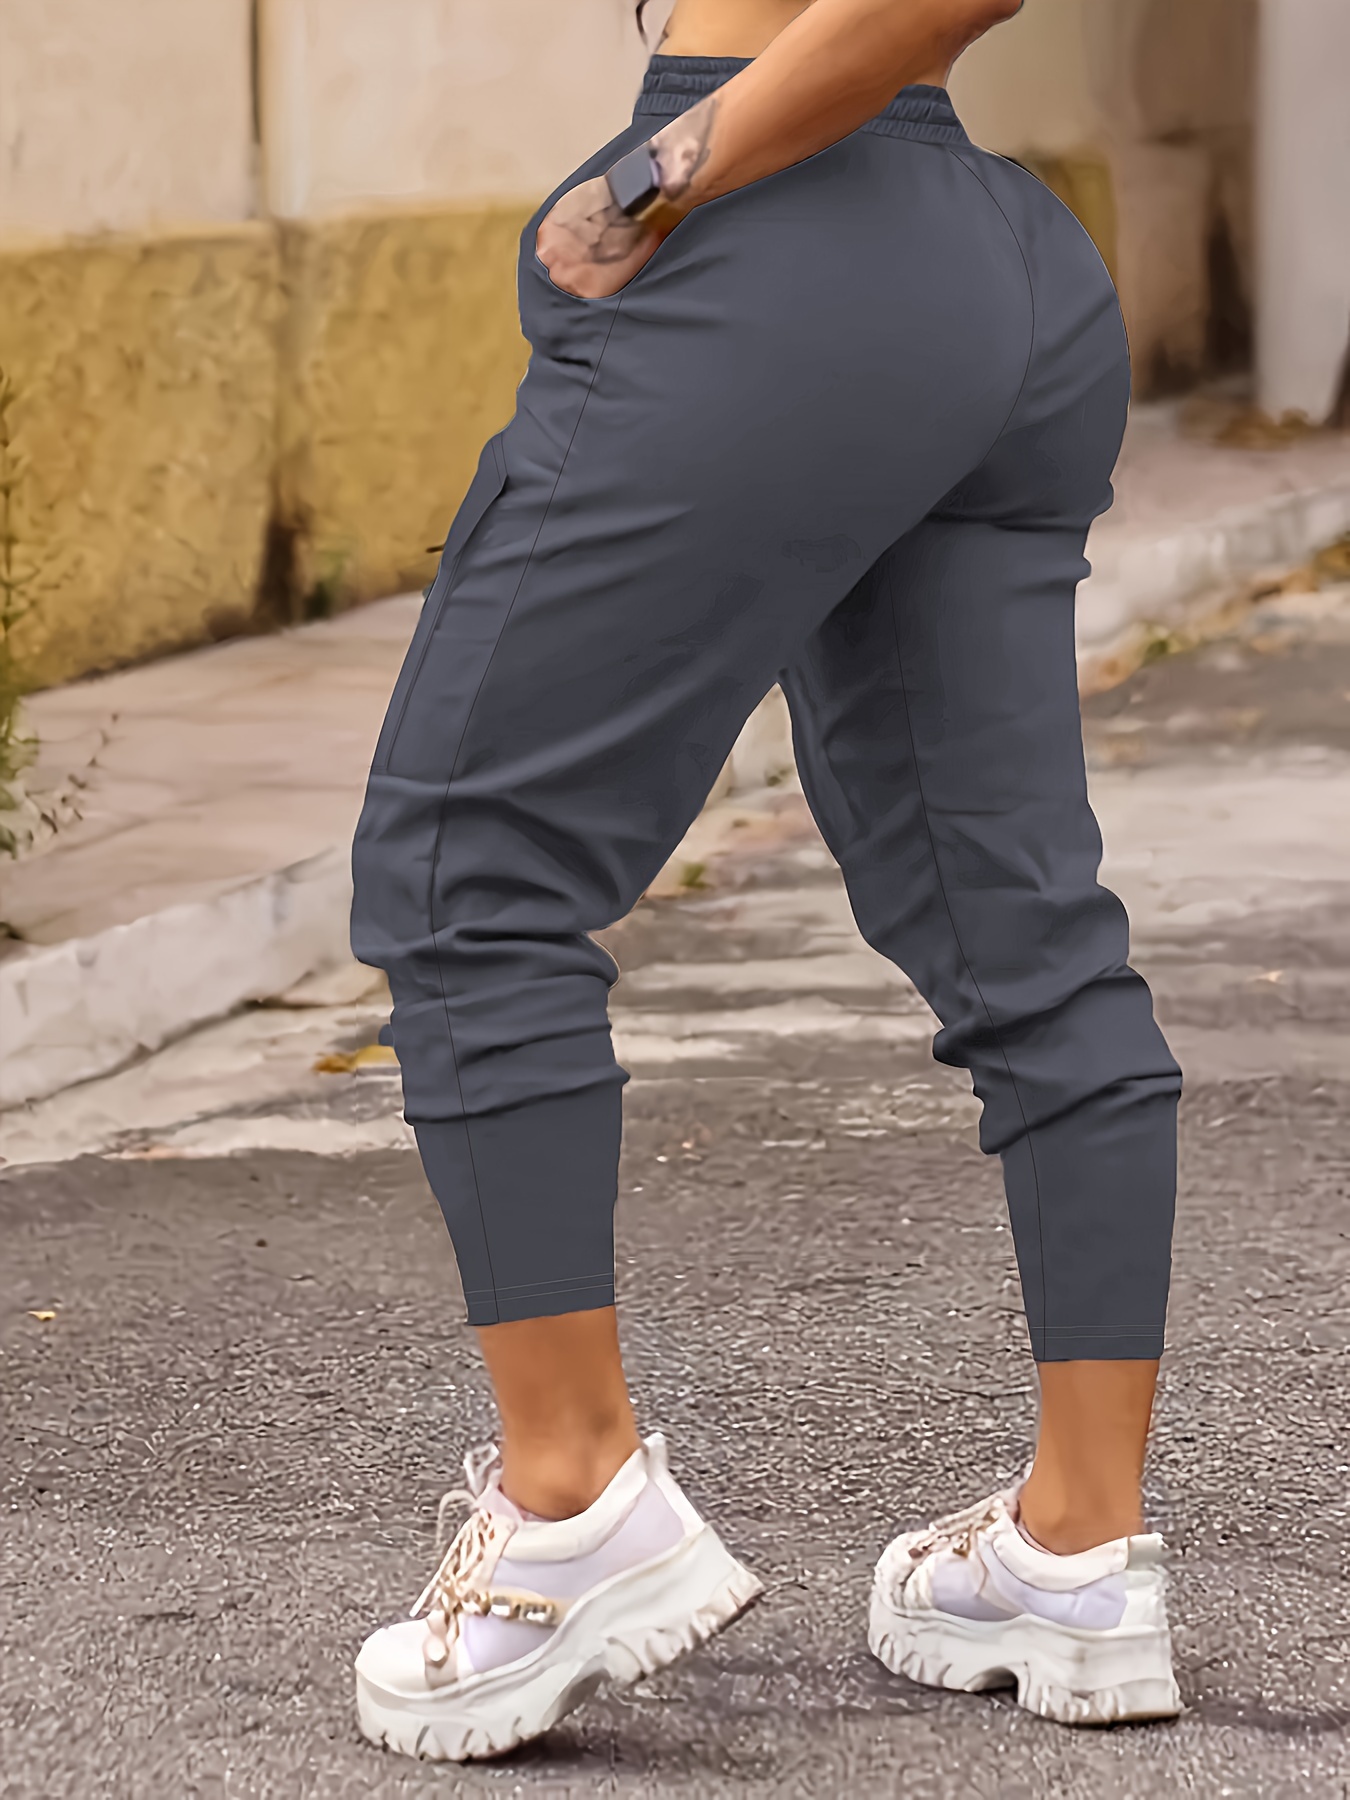 Ladies Drawstring Sweatpants High Waisted Cargo Wide Leg Pants Spring and  Fall New Yoga Activewear Leisure Trousers